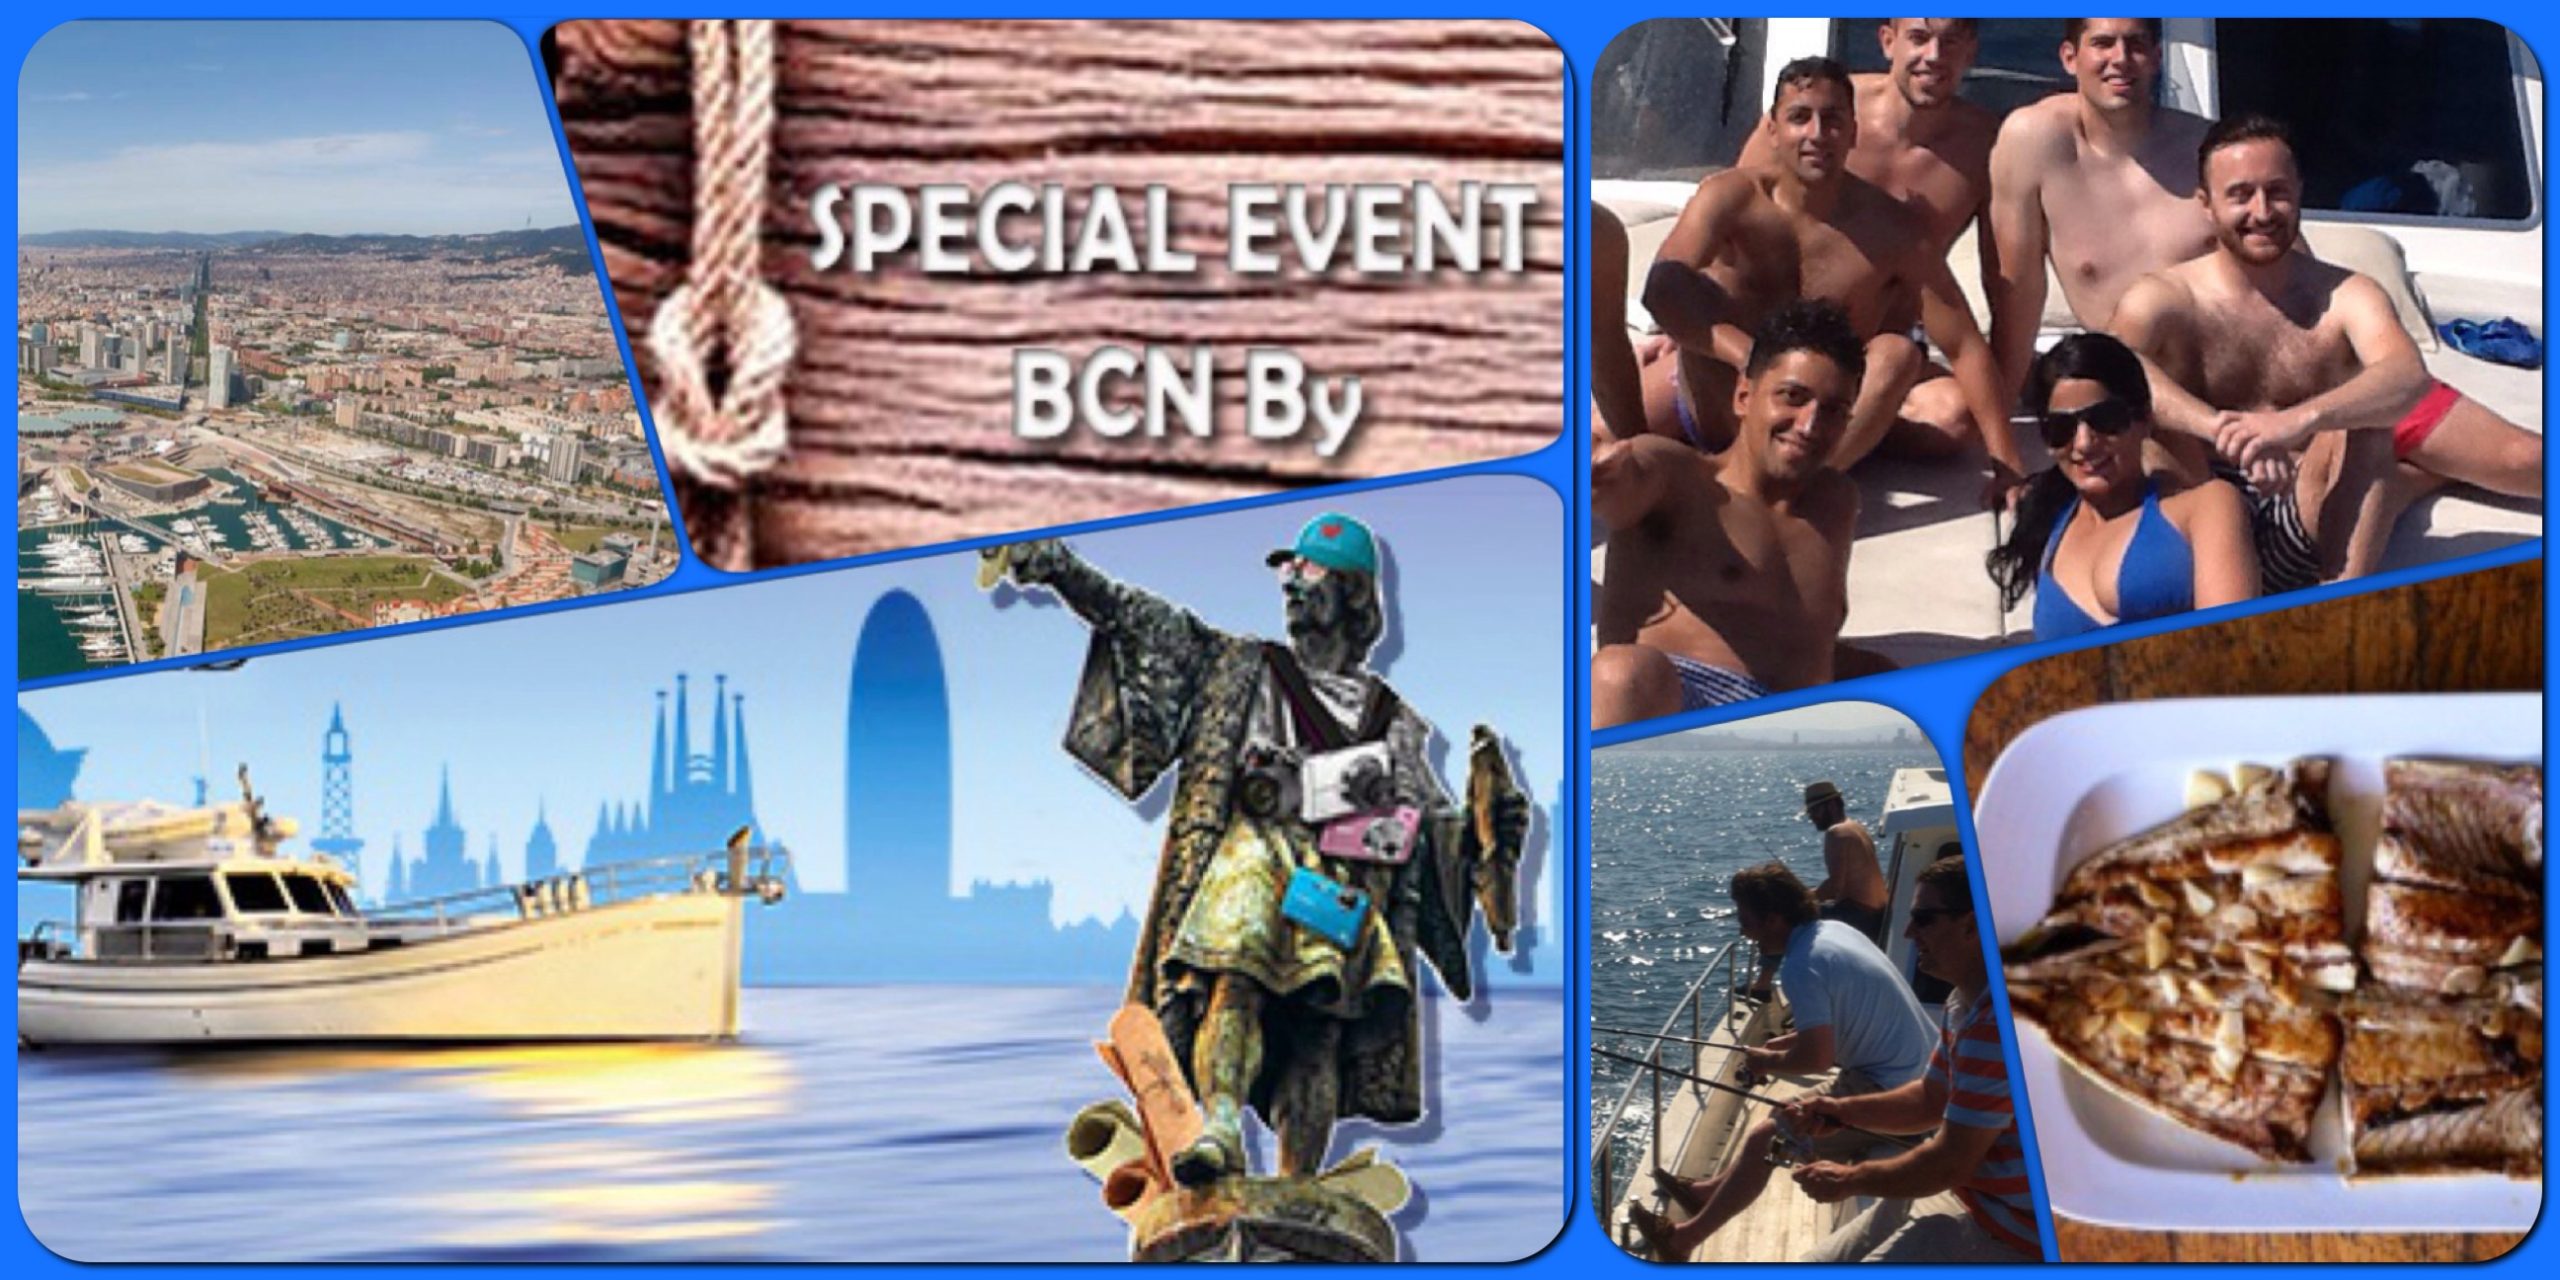 charterinad does the nautical events in Barcelone with a rent boat